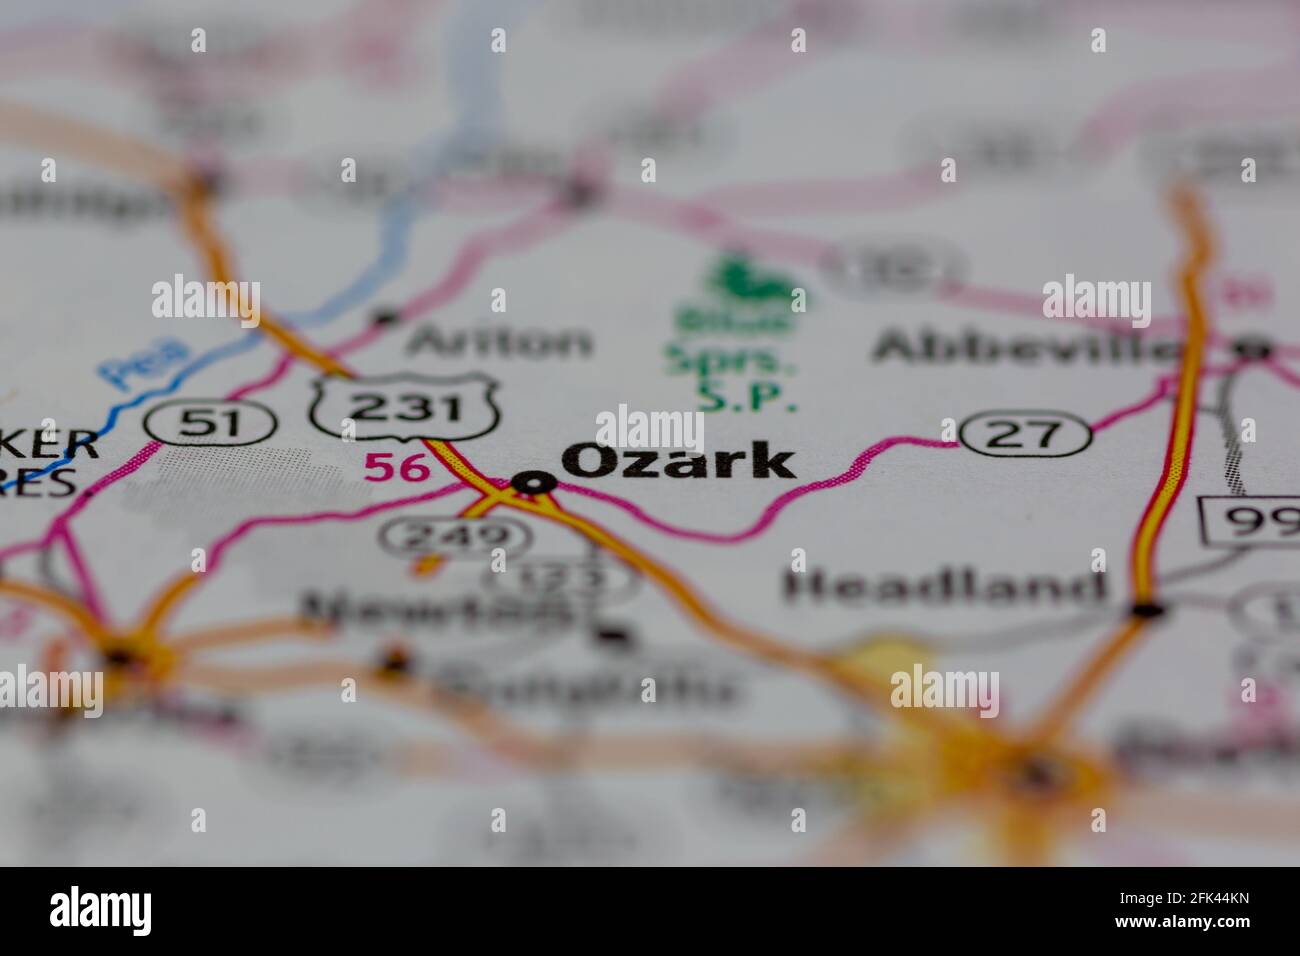 Ozark Alabama USA shown on a geography map or road map Stock Photo